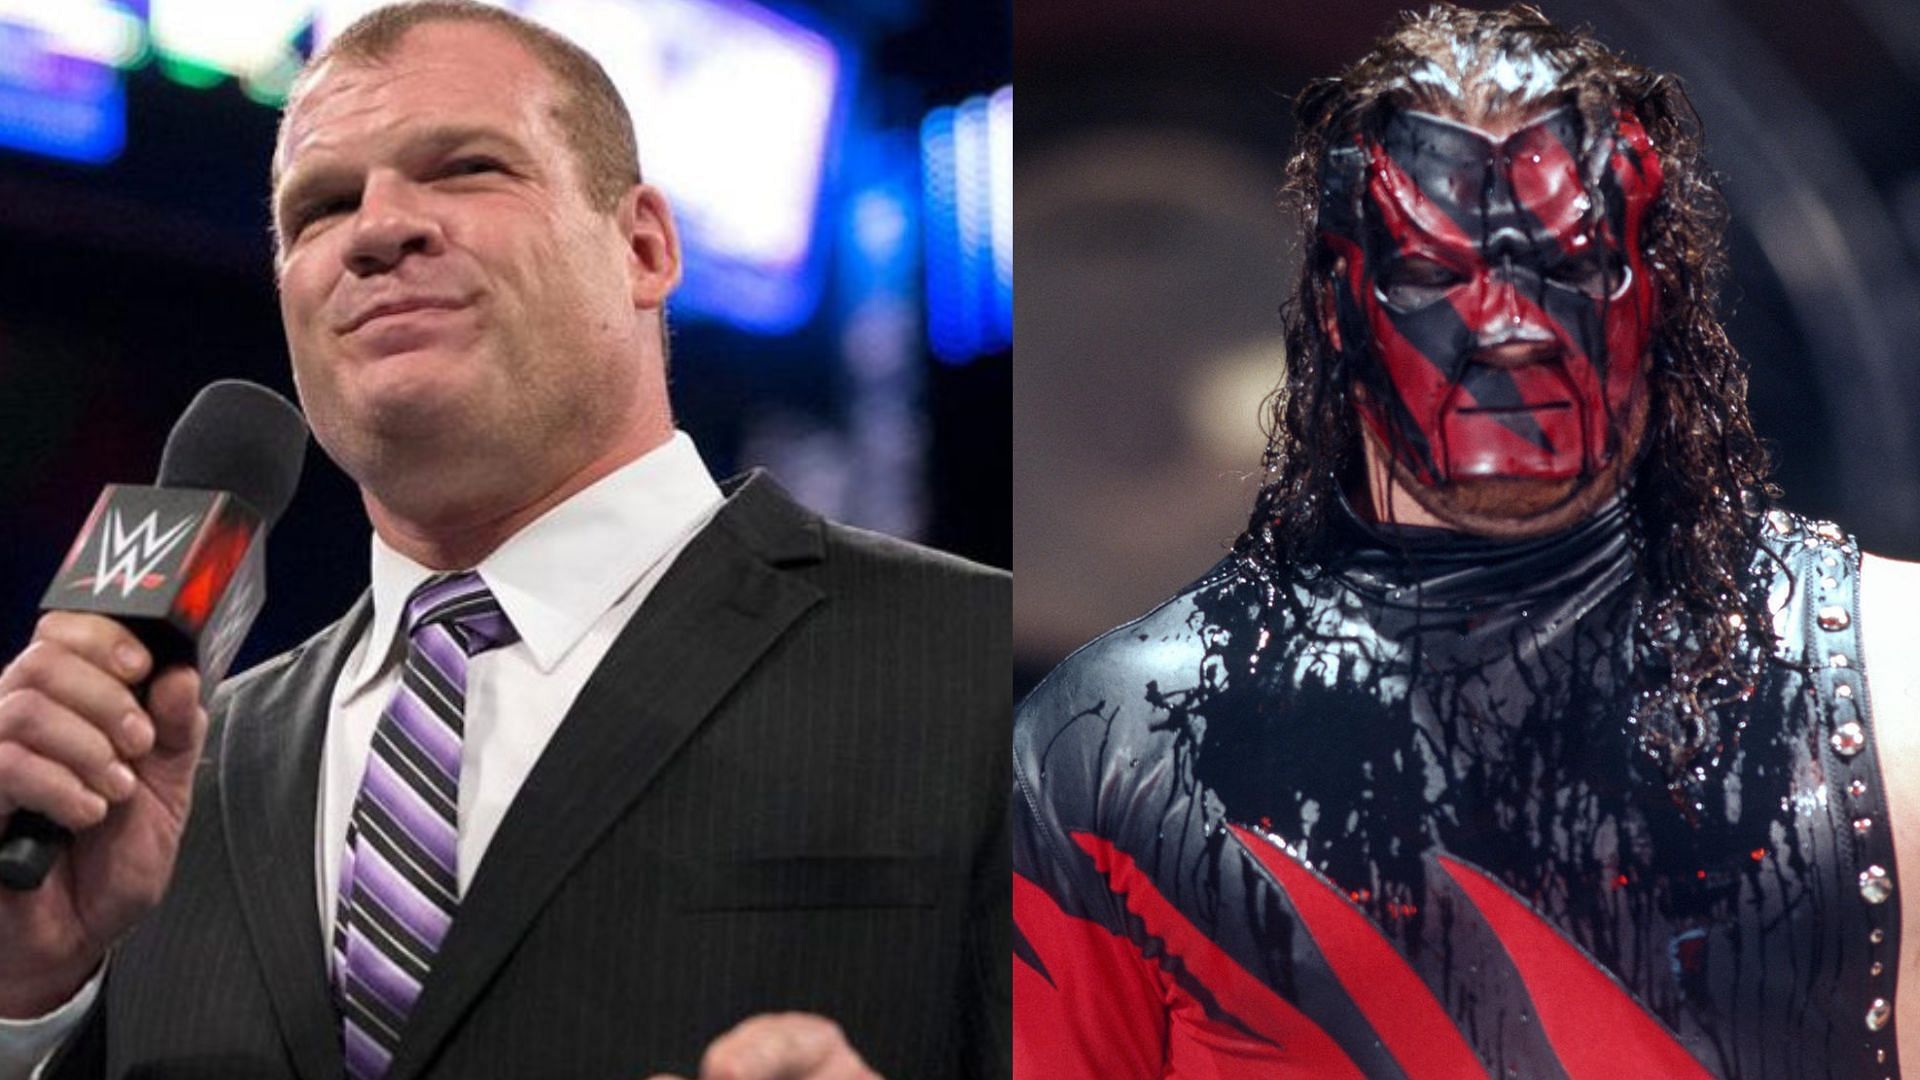 Kane WWE Net Worth How much did Kane add to his net worth in 2022 via